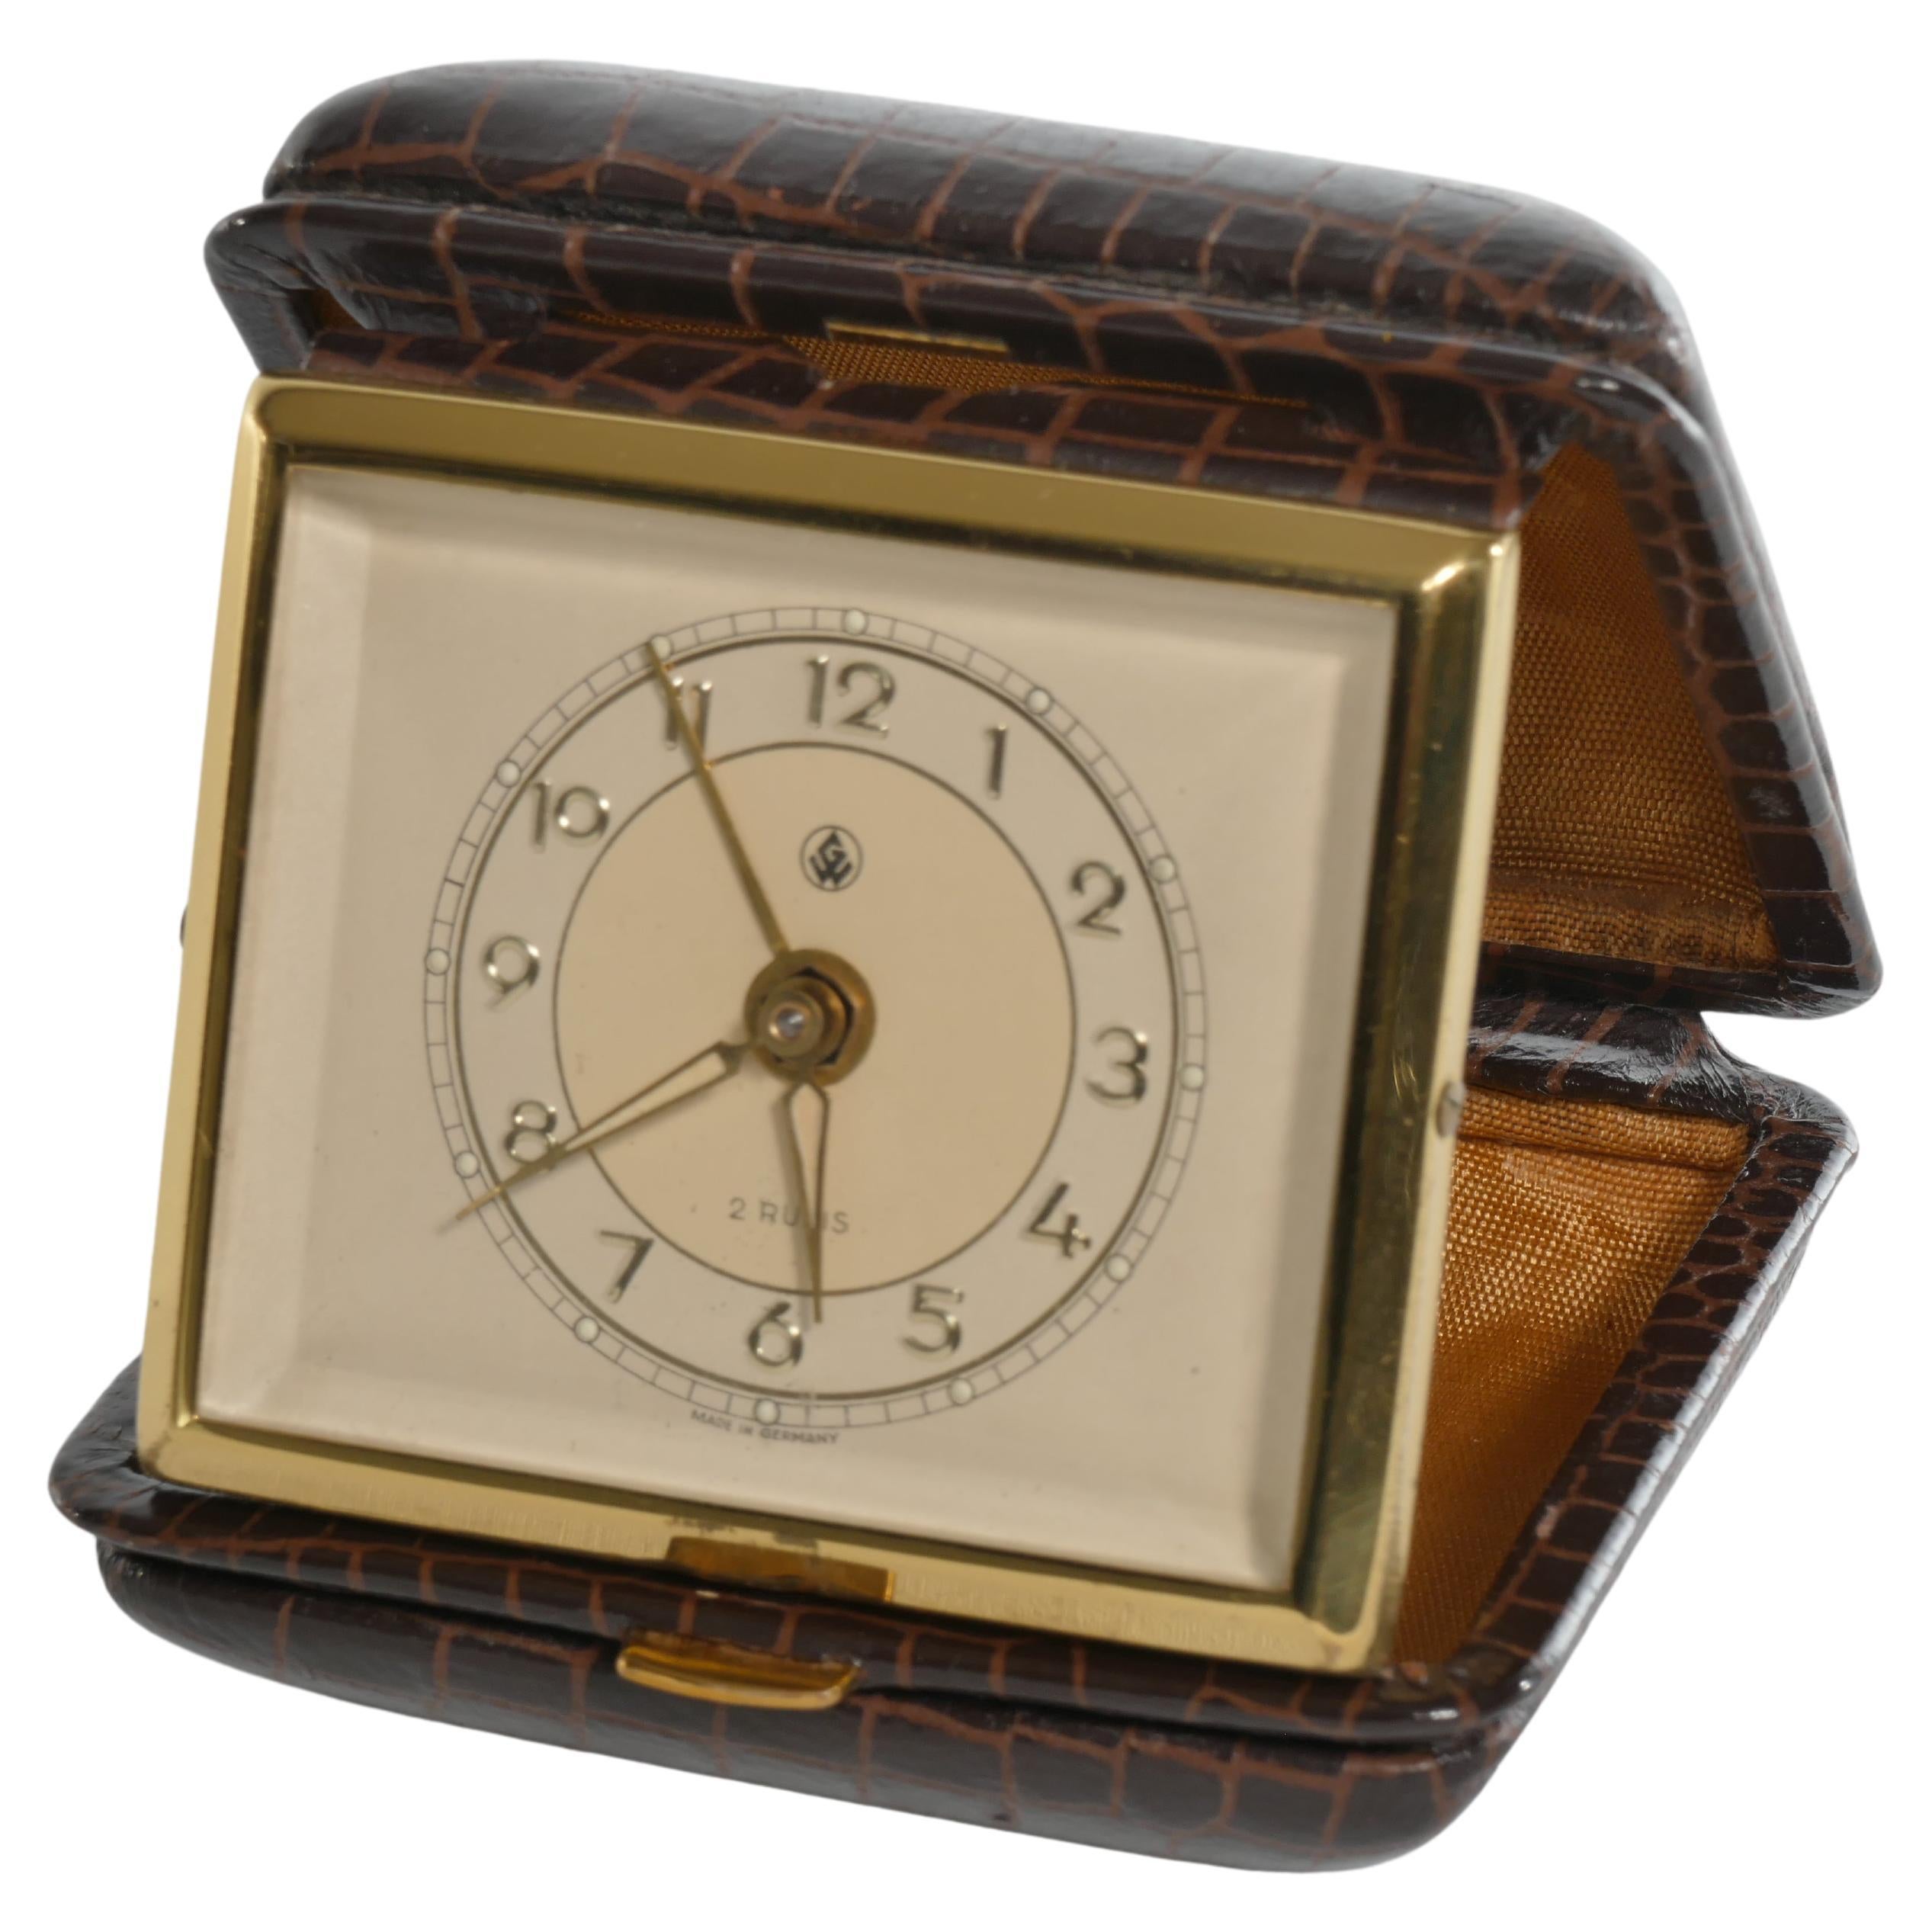 Travel Alarm Clock in Brass and Faux Snakeskin from "GW", Germany, ca 1950's